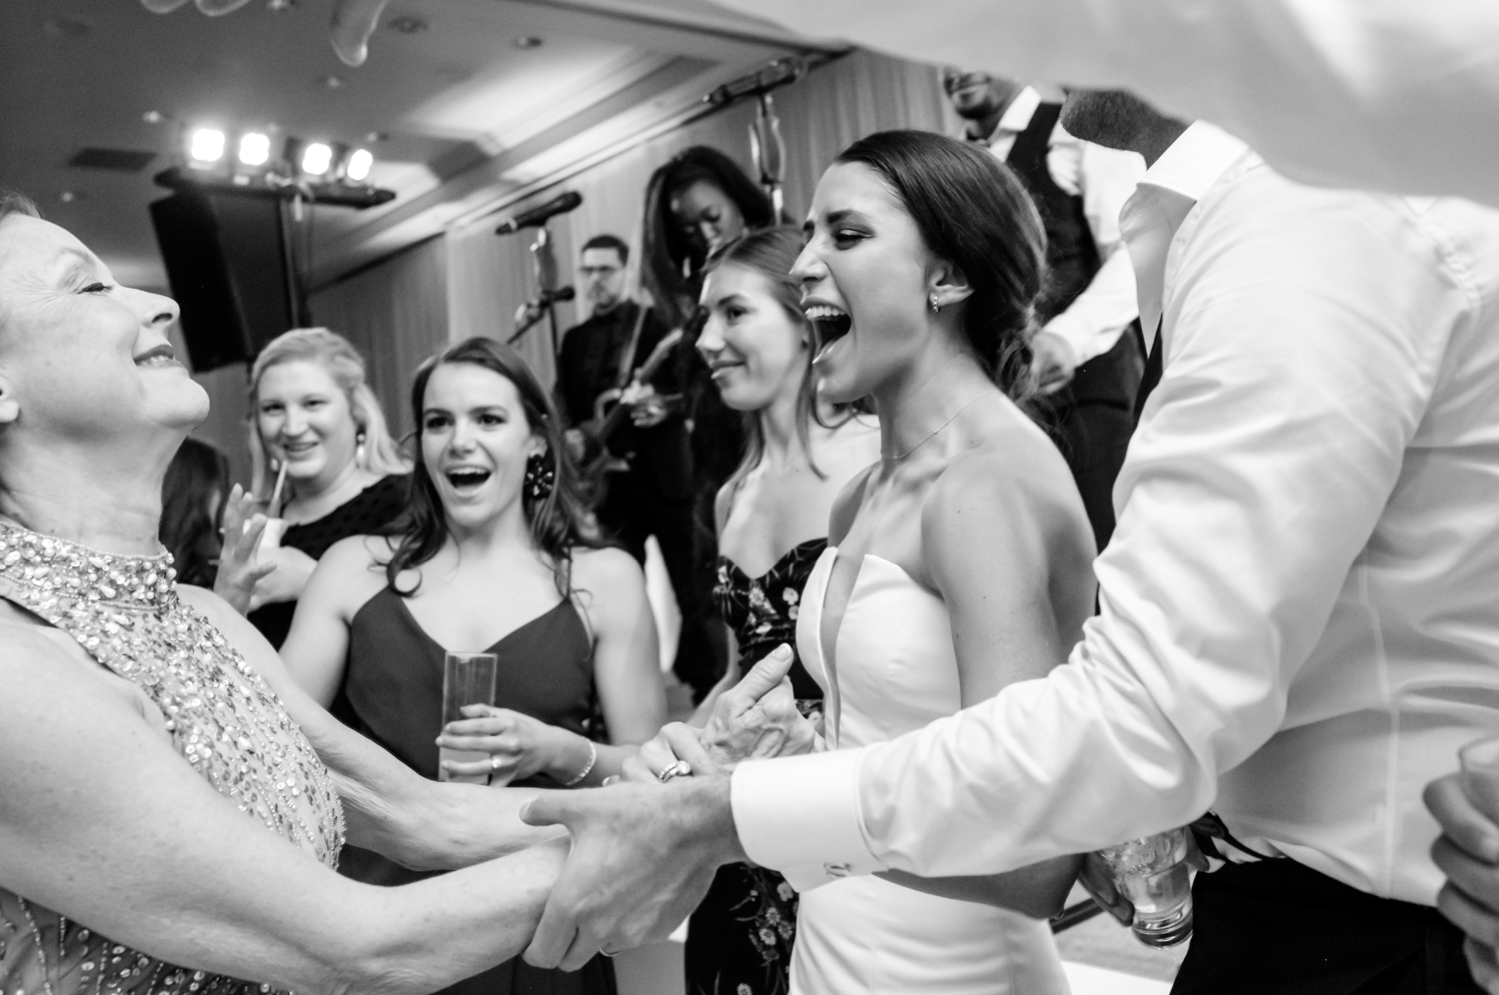 The bride laughs as she dances with family.